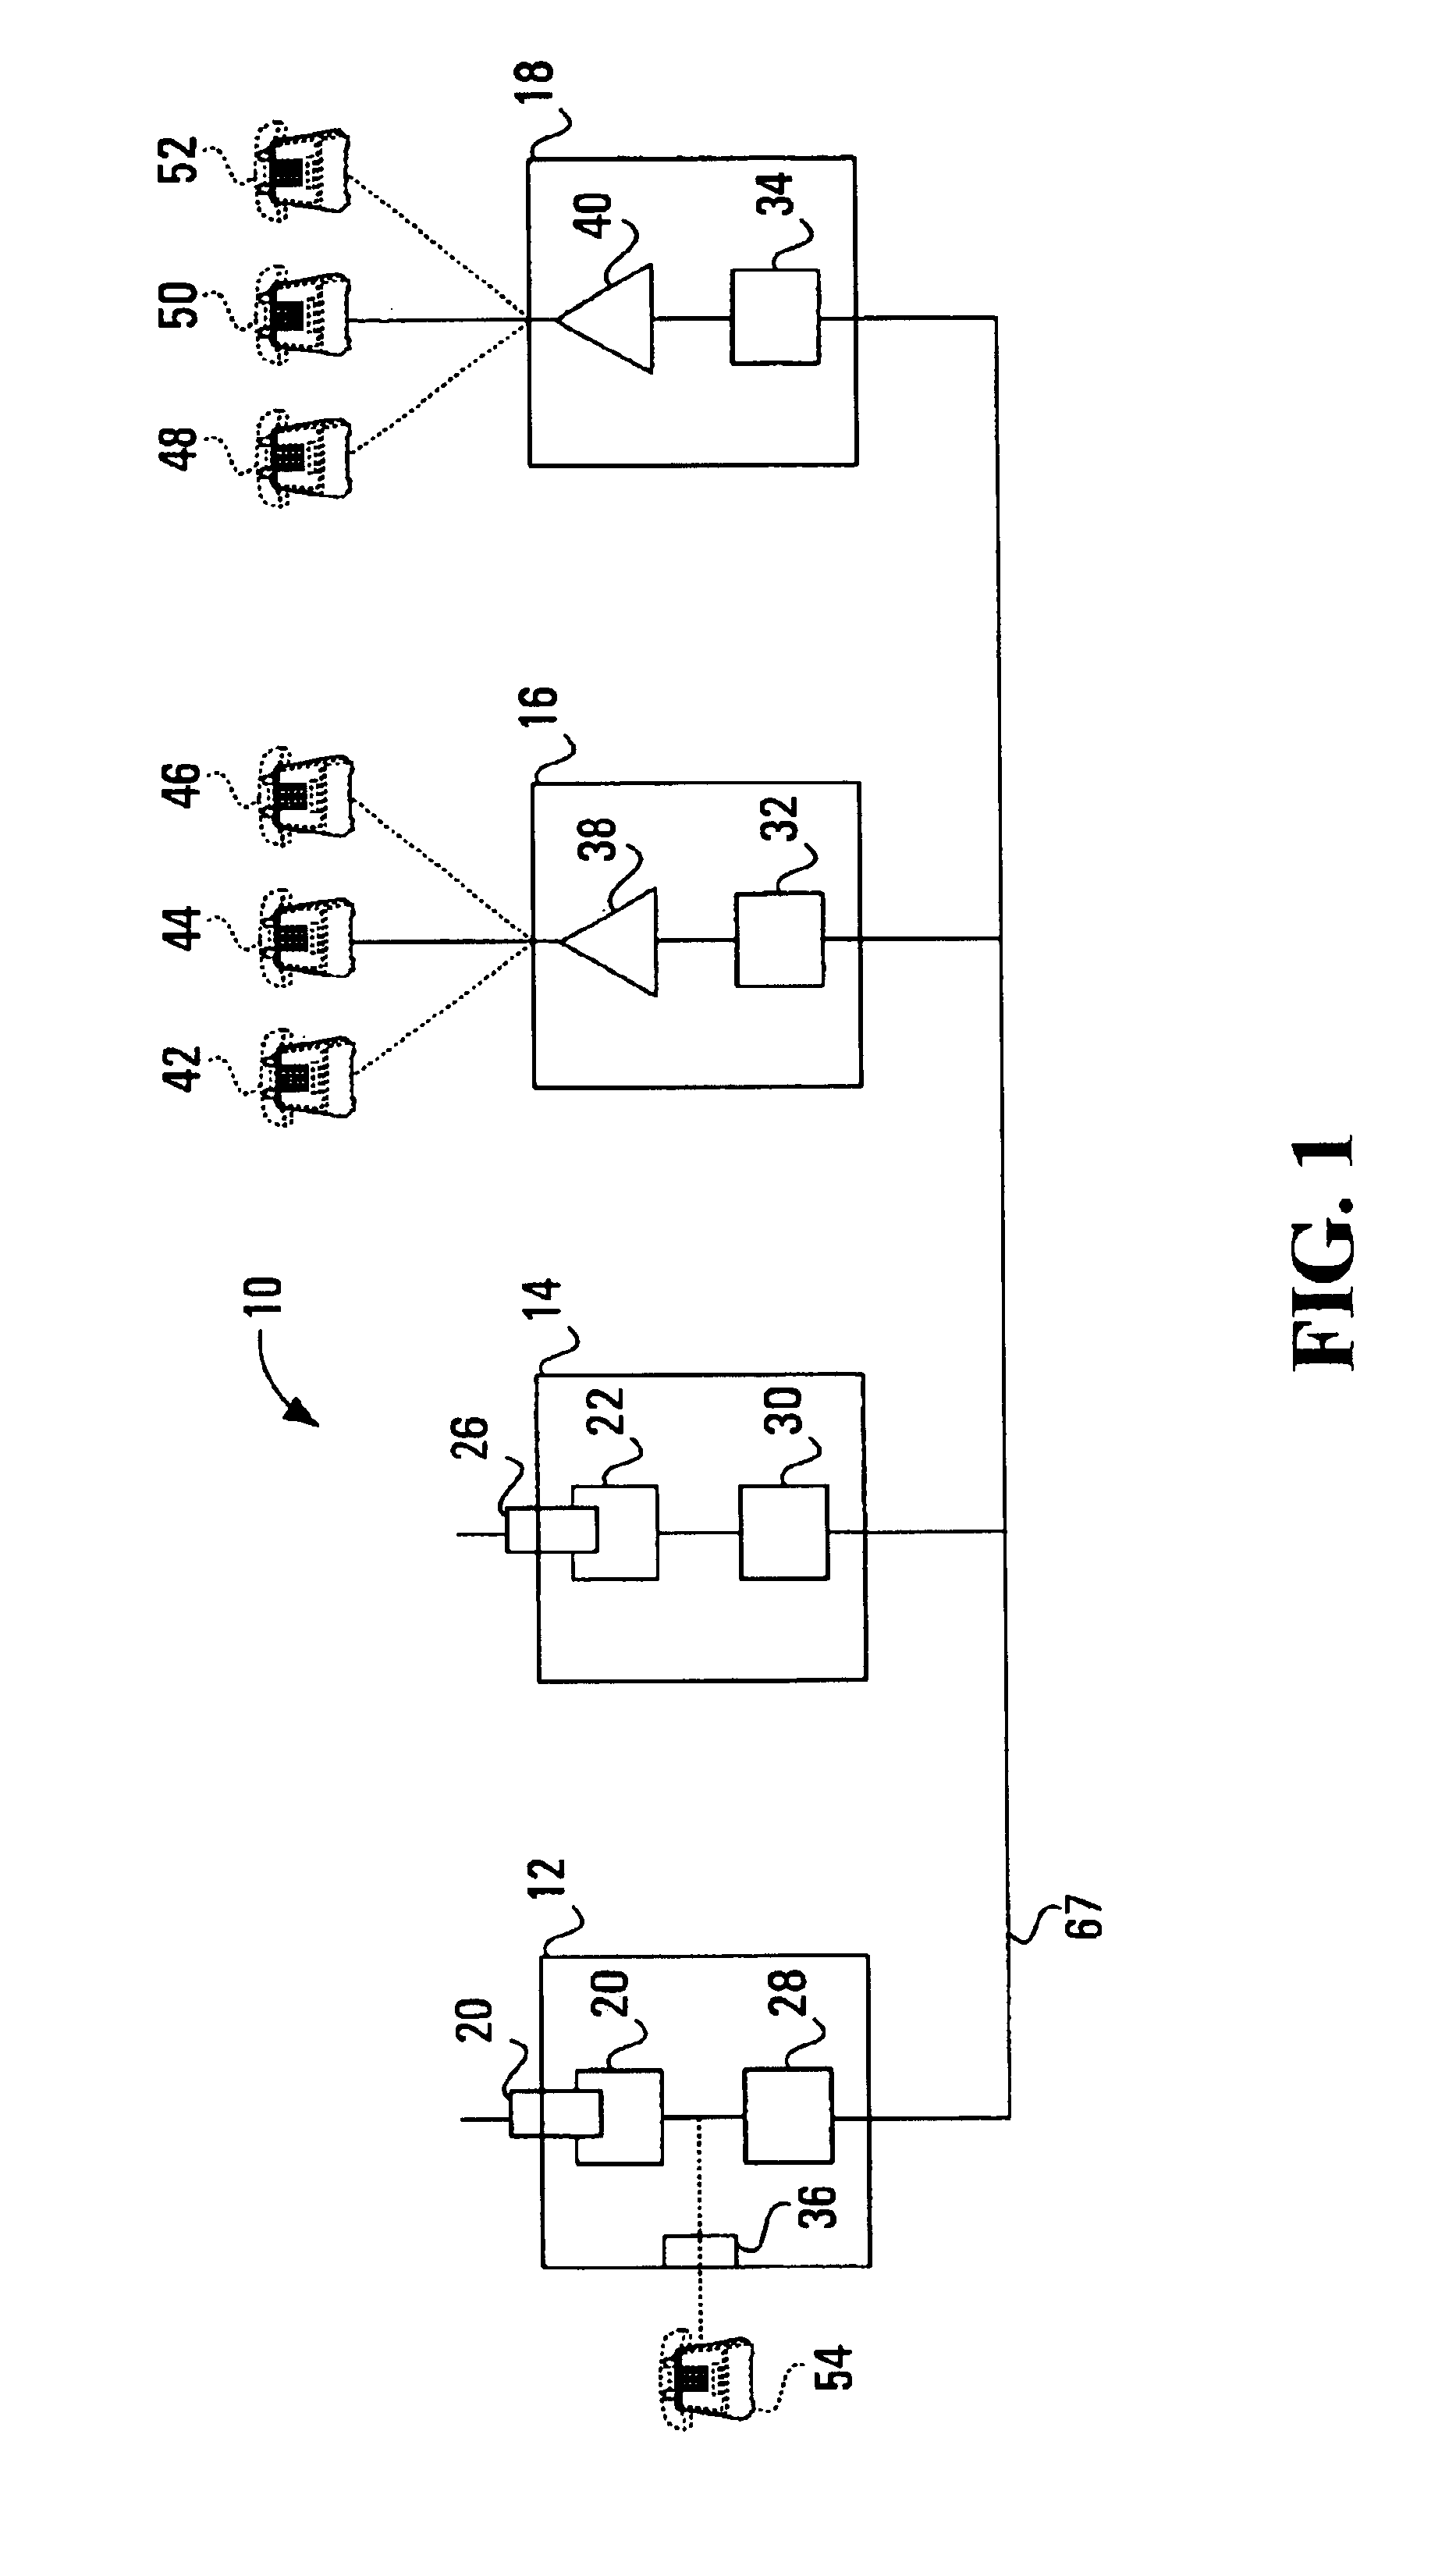 Communications unit, system and methods for providing multiple access to a wireless transceiver